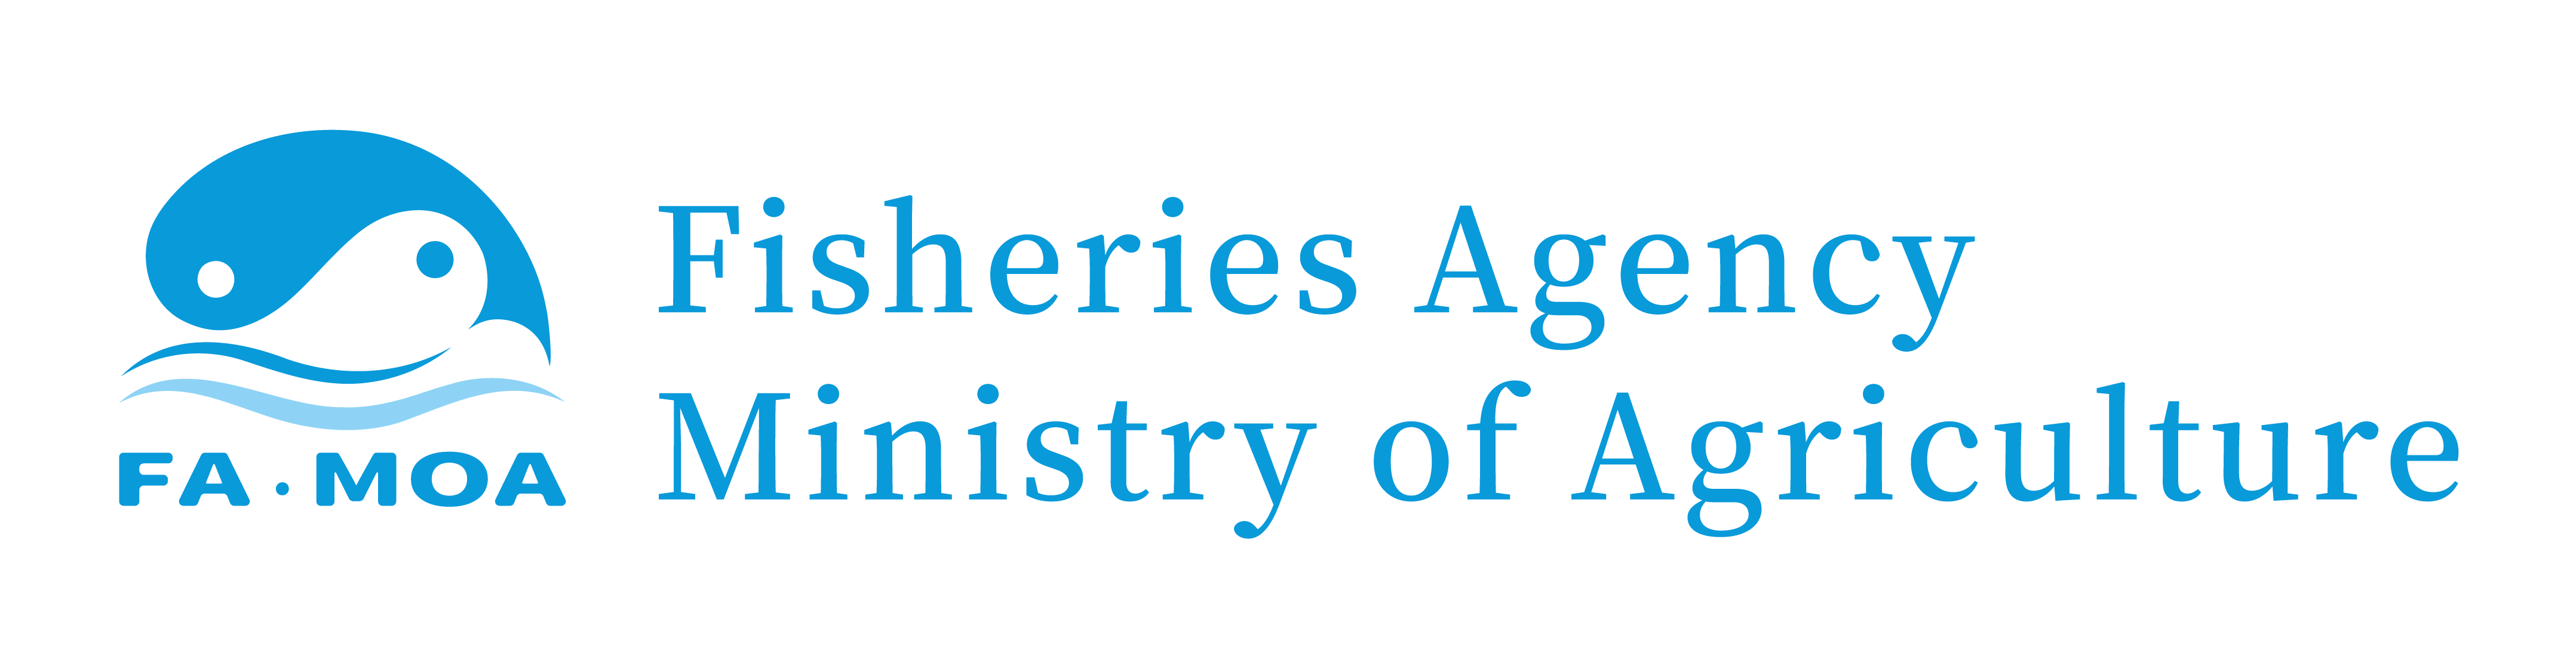 Fisheries Agency,Ministry of Agriculture